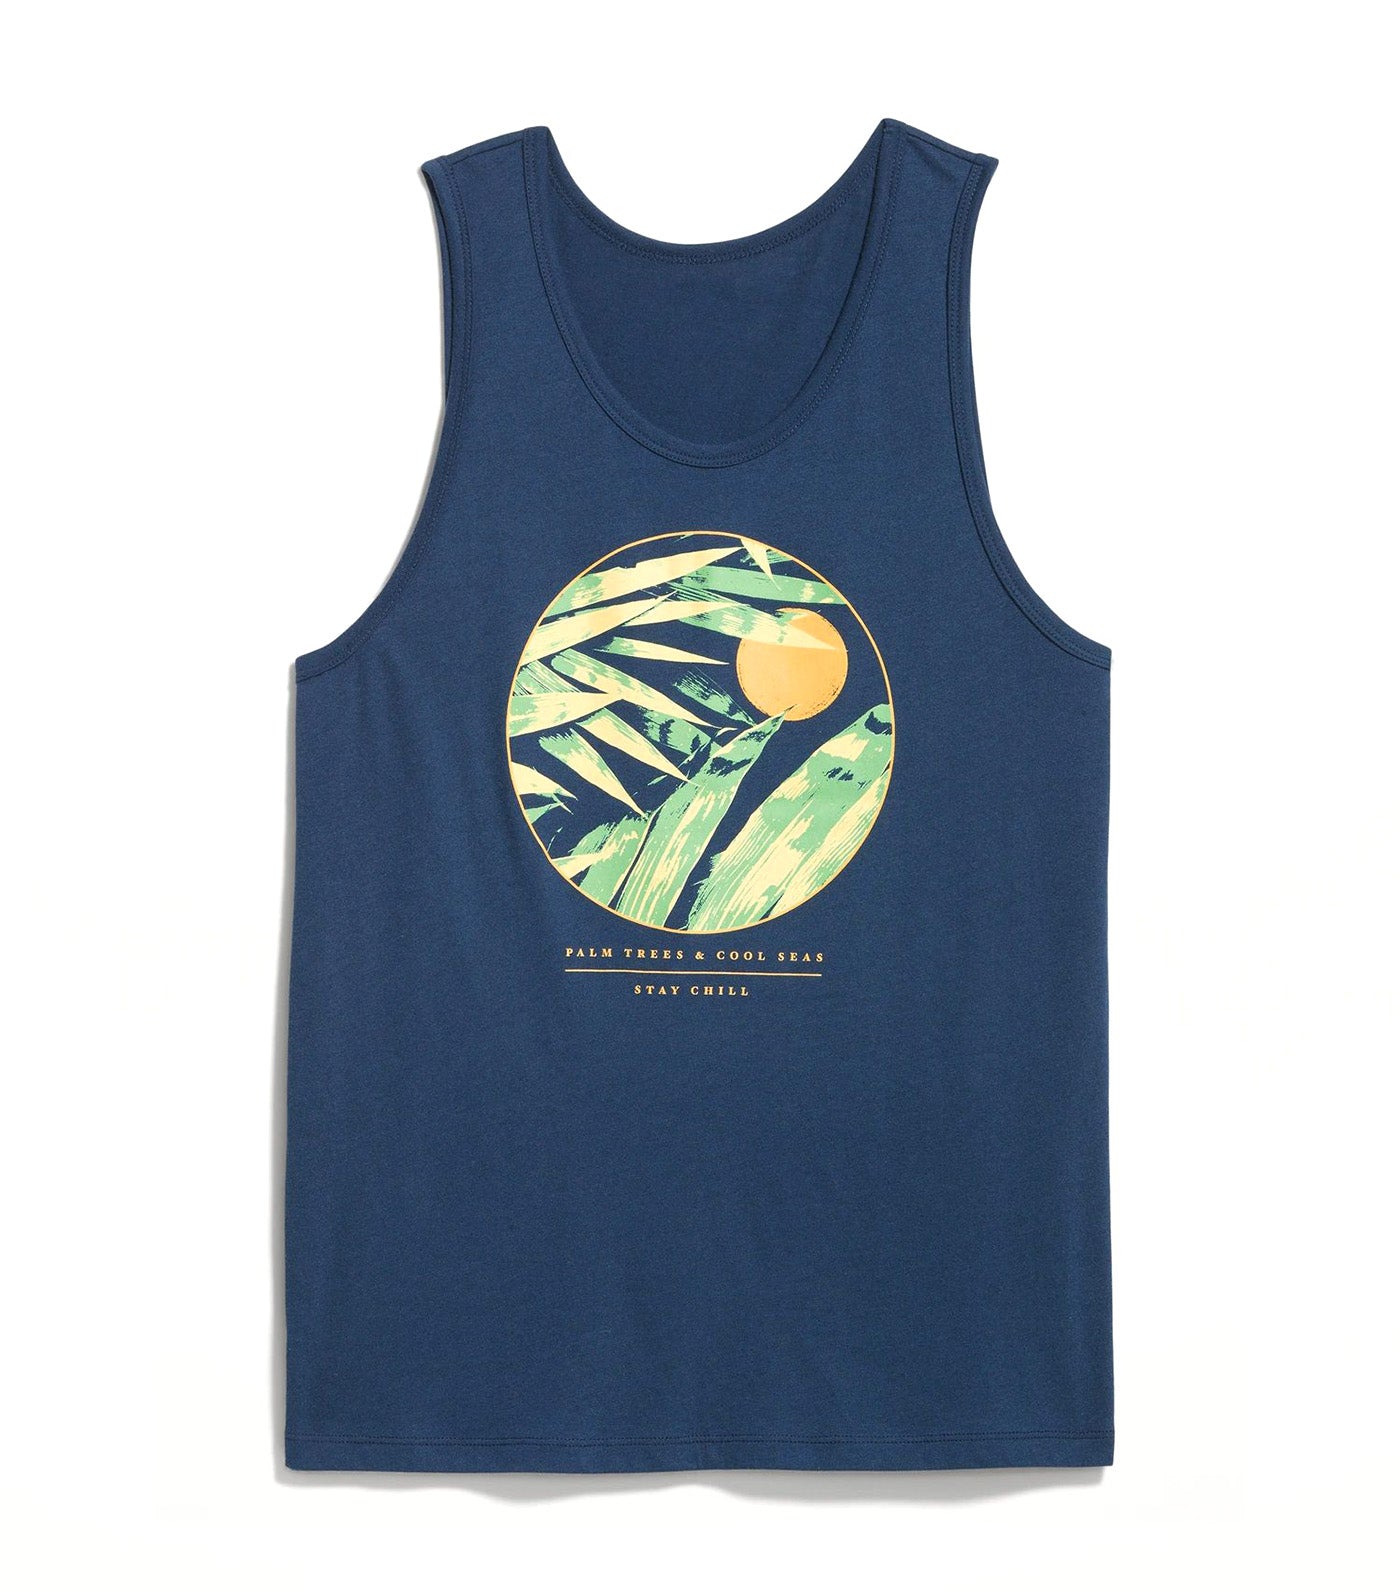 Soft-Washed Graphic Tank Top for Men Obscure Night